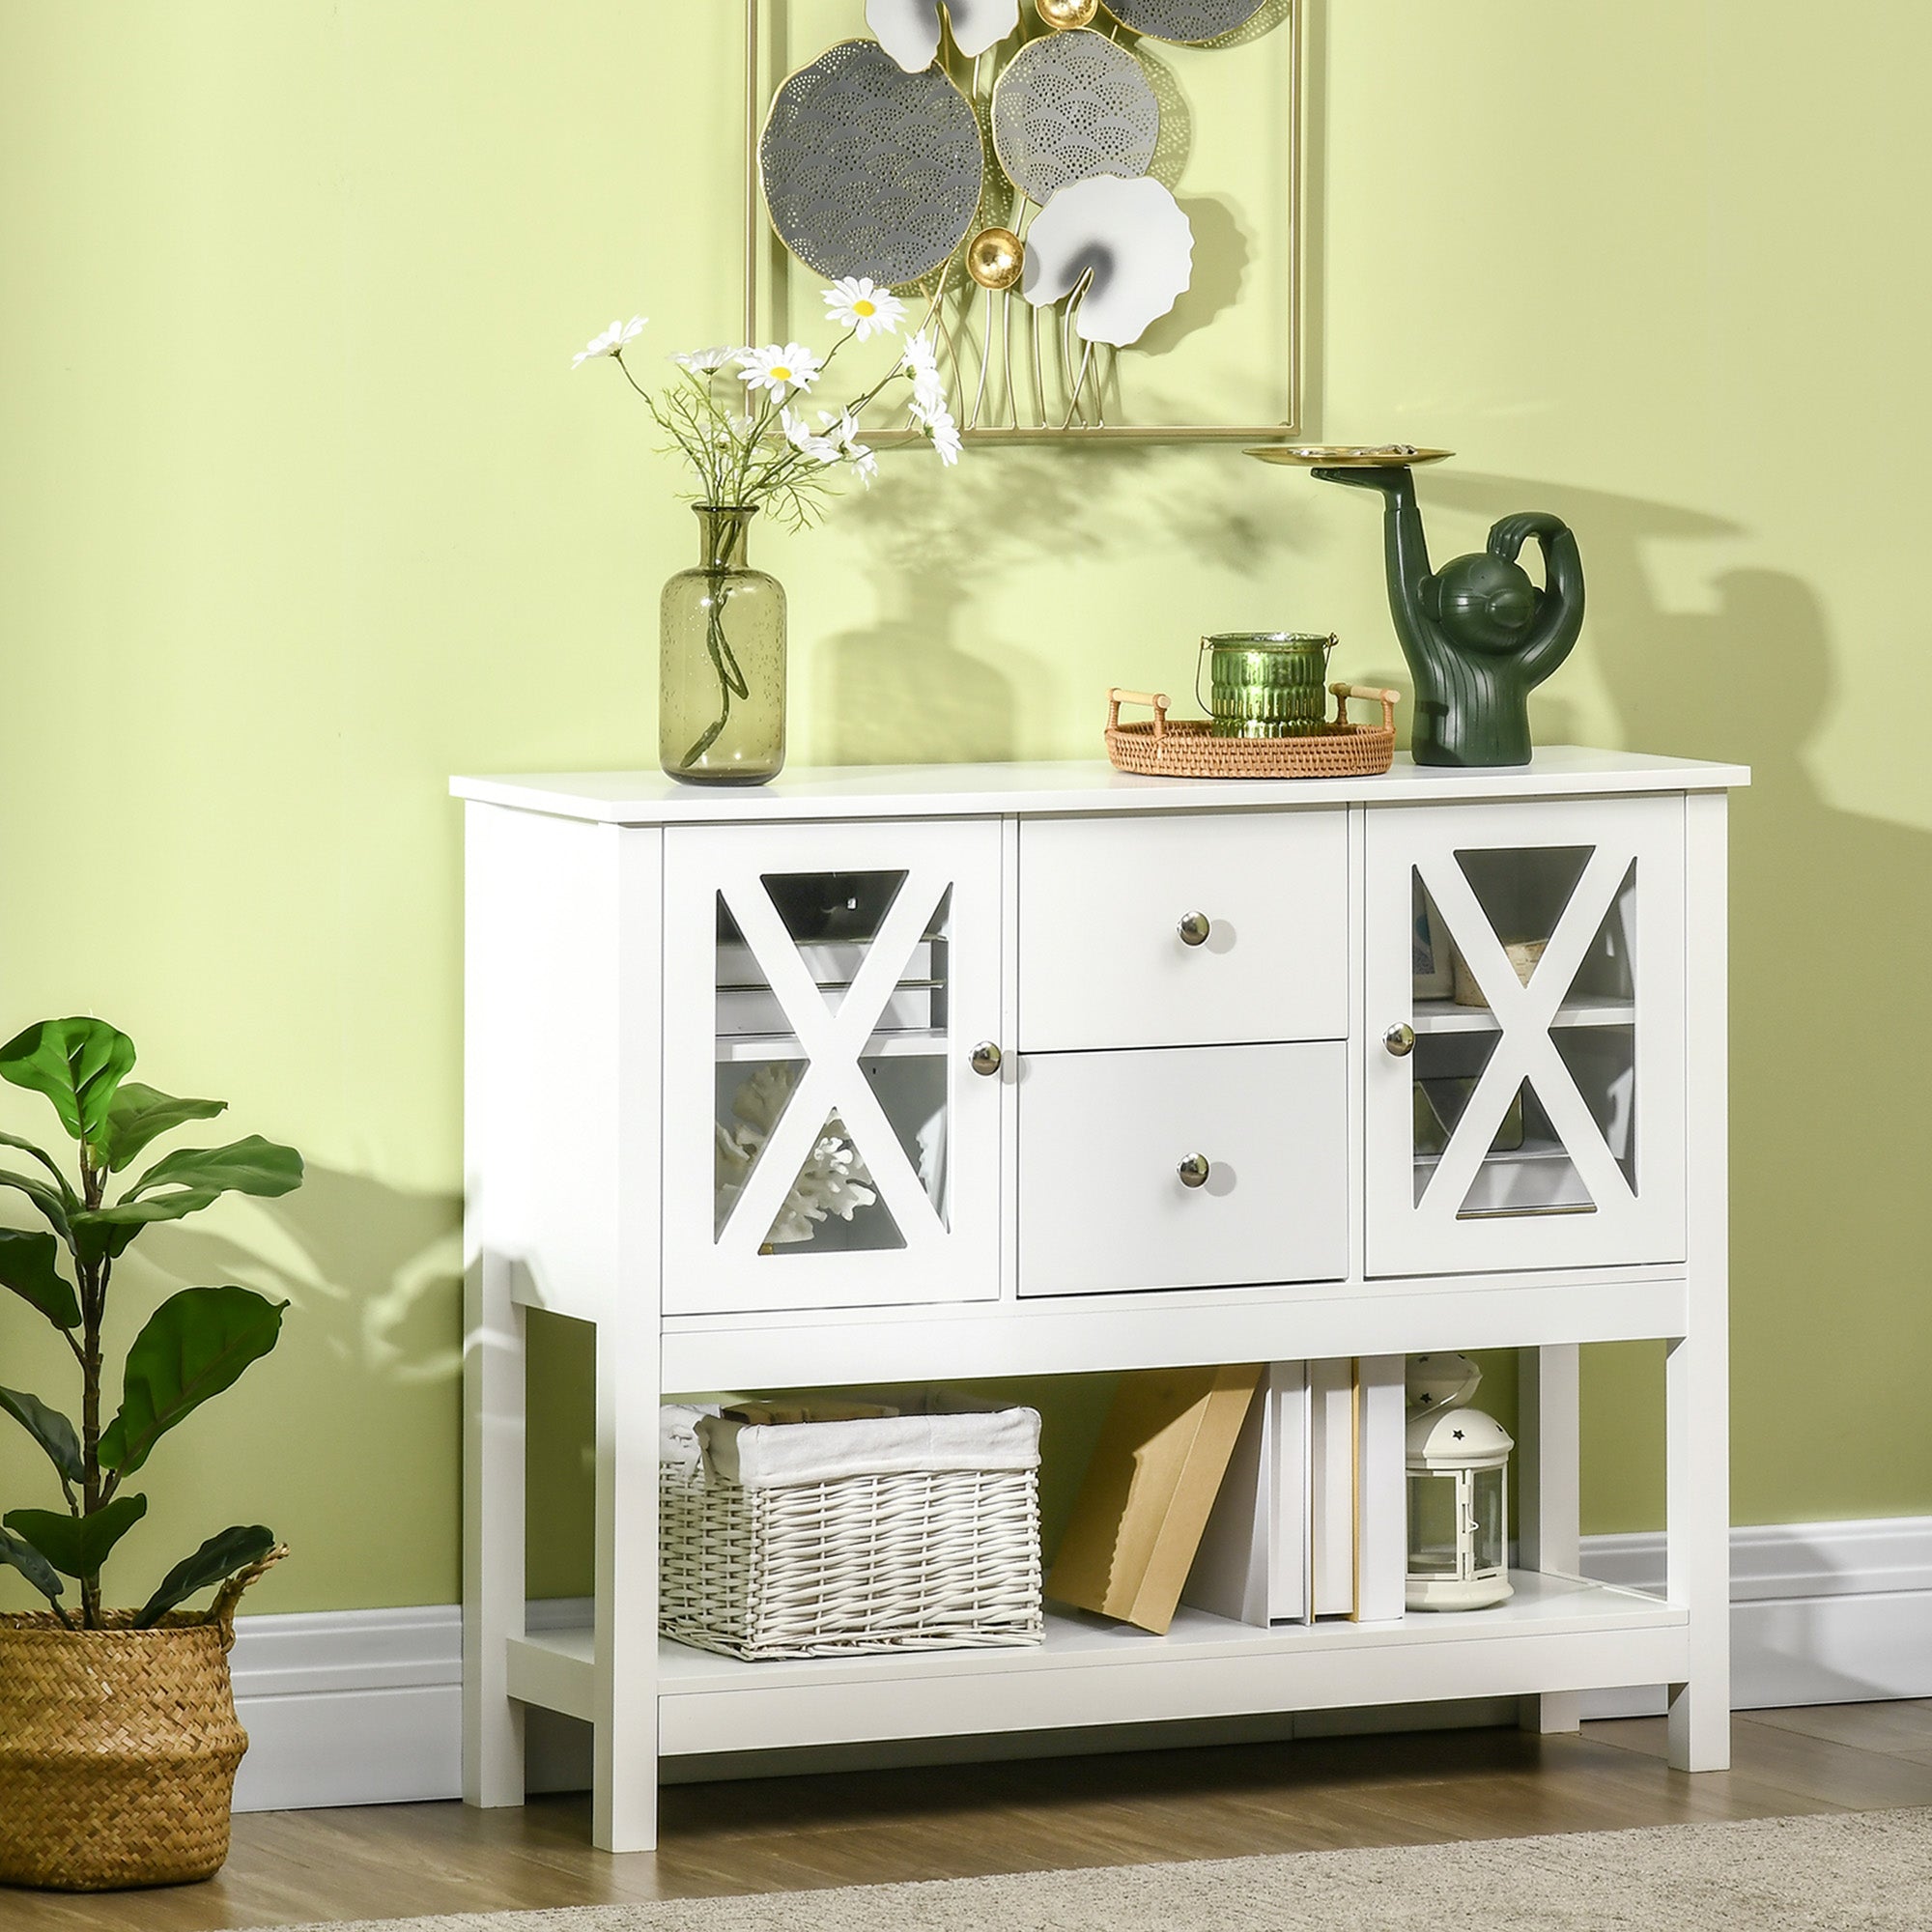 Halifax North America Modern 35.75 High Sideboard with Drawers | Mathis Home